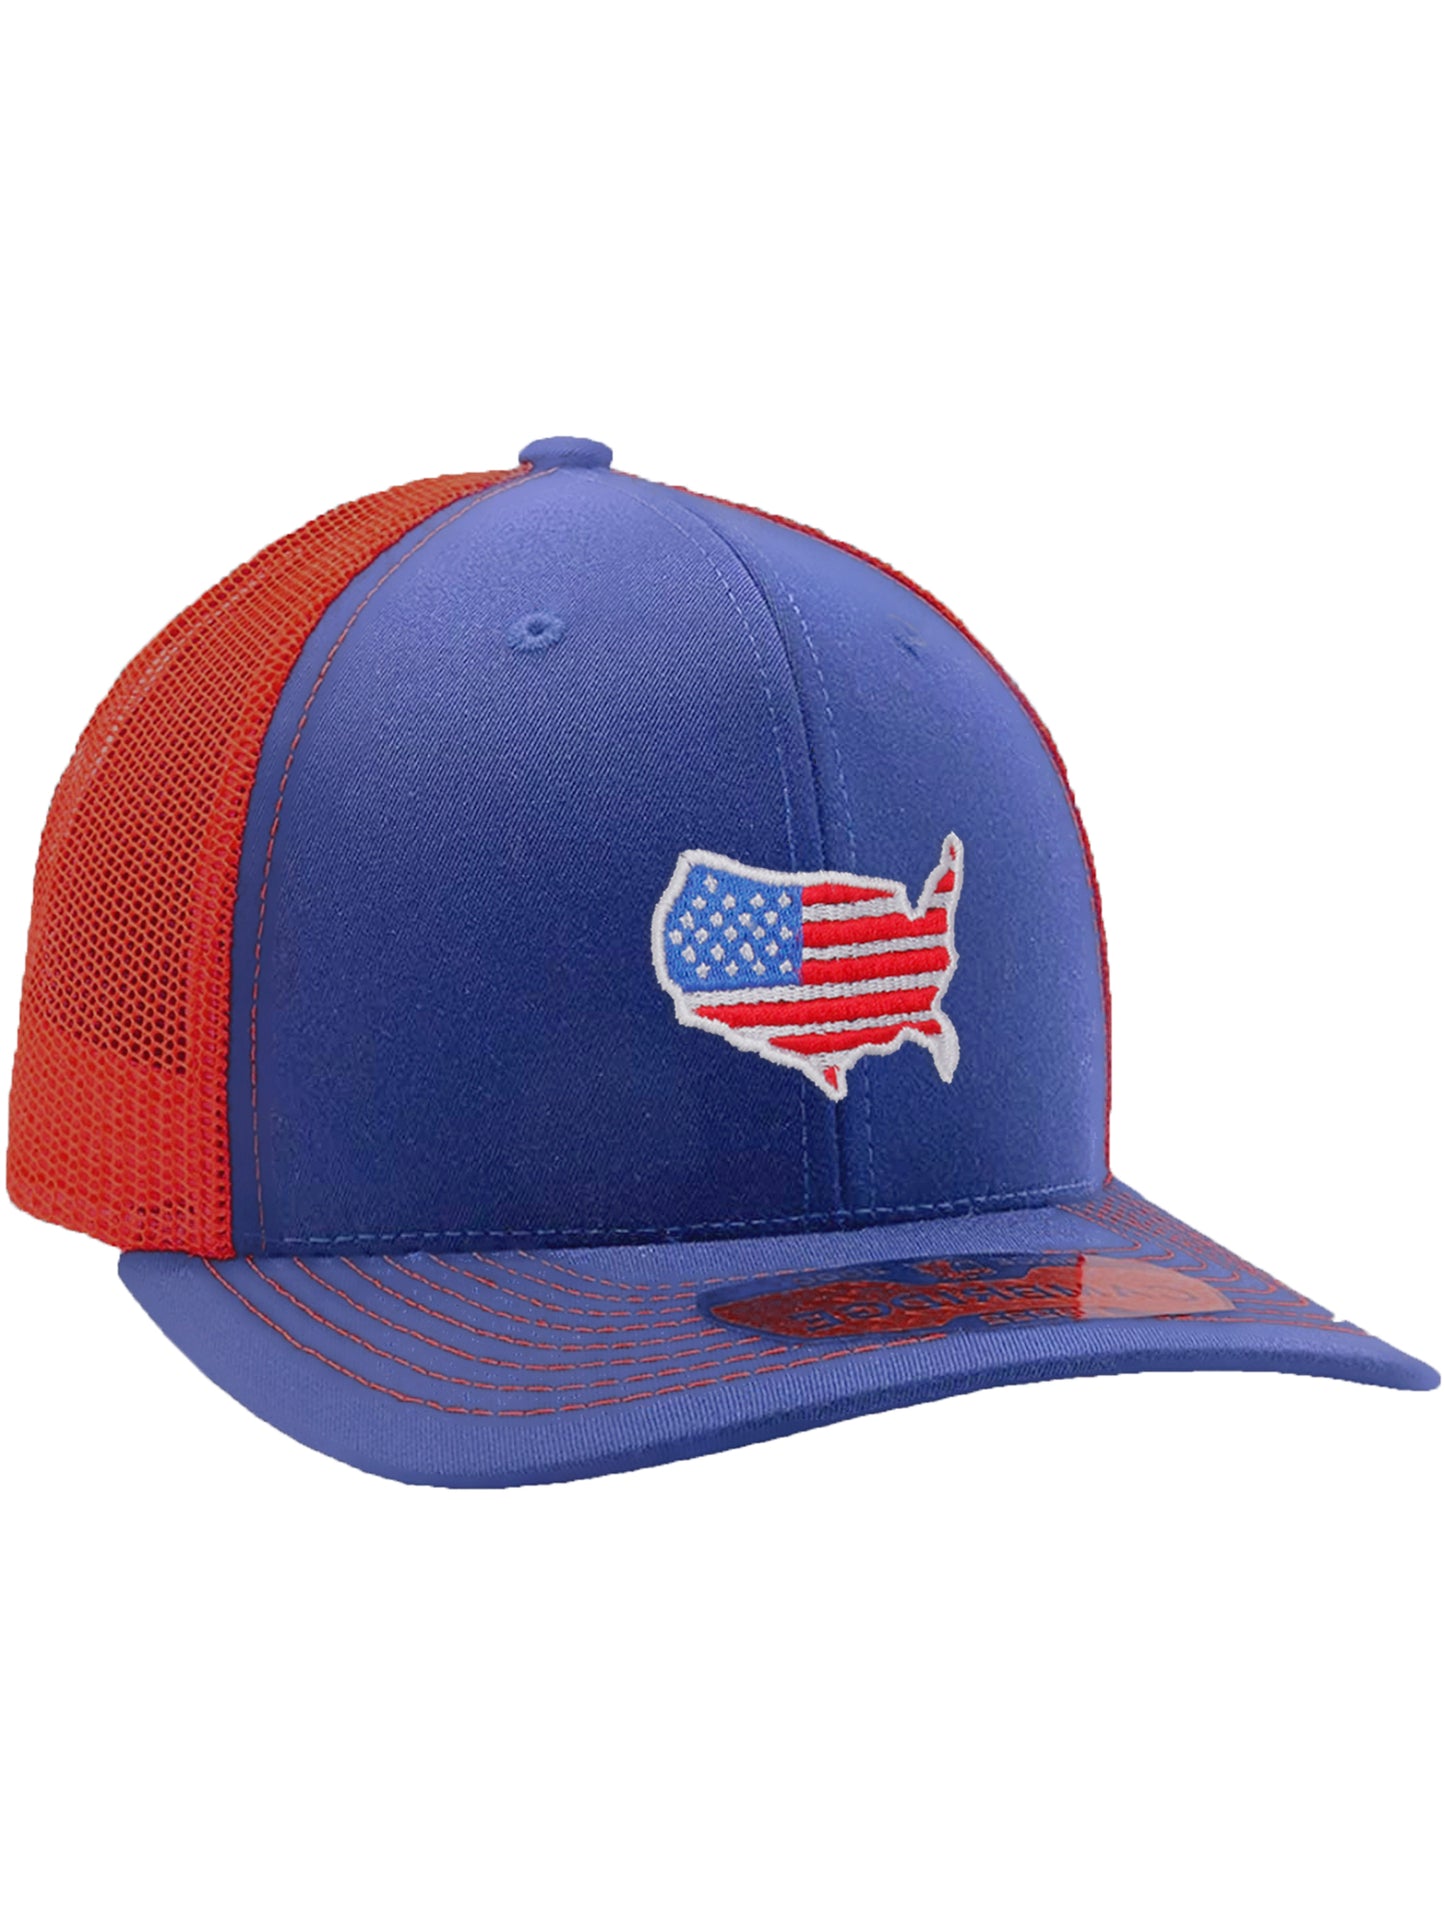 Daxton Classic Baseball Trucker Hat Embroidered USA Flag Structured Mid Profile Cap